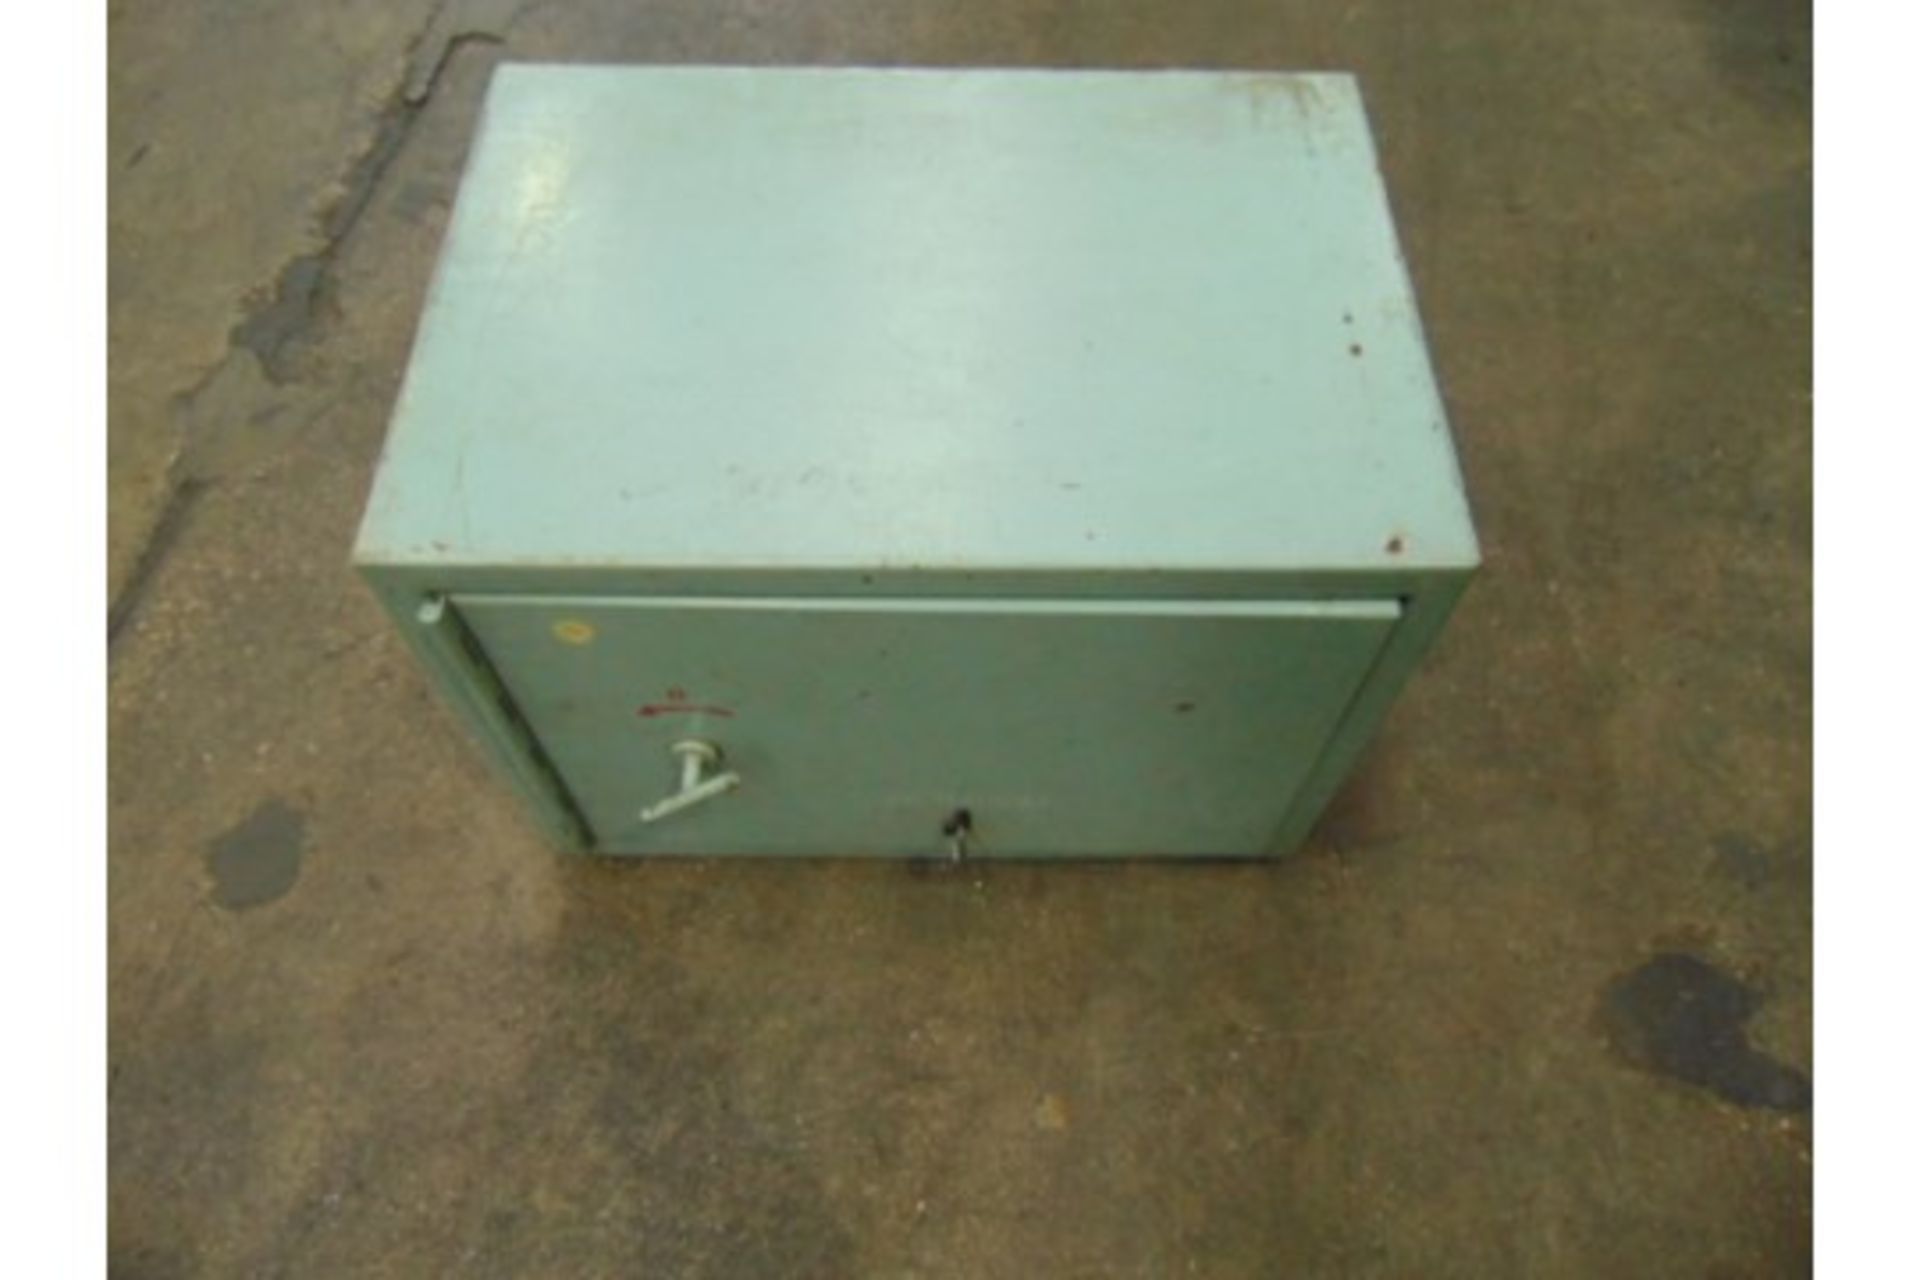 You are bidding on a Lockable Safe Box. It is sold as seen without warranty and has not been tried - Image 4 of 4